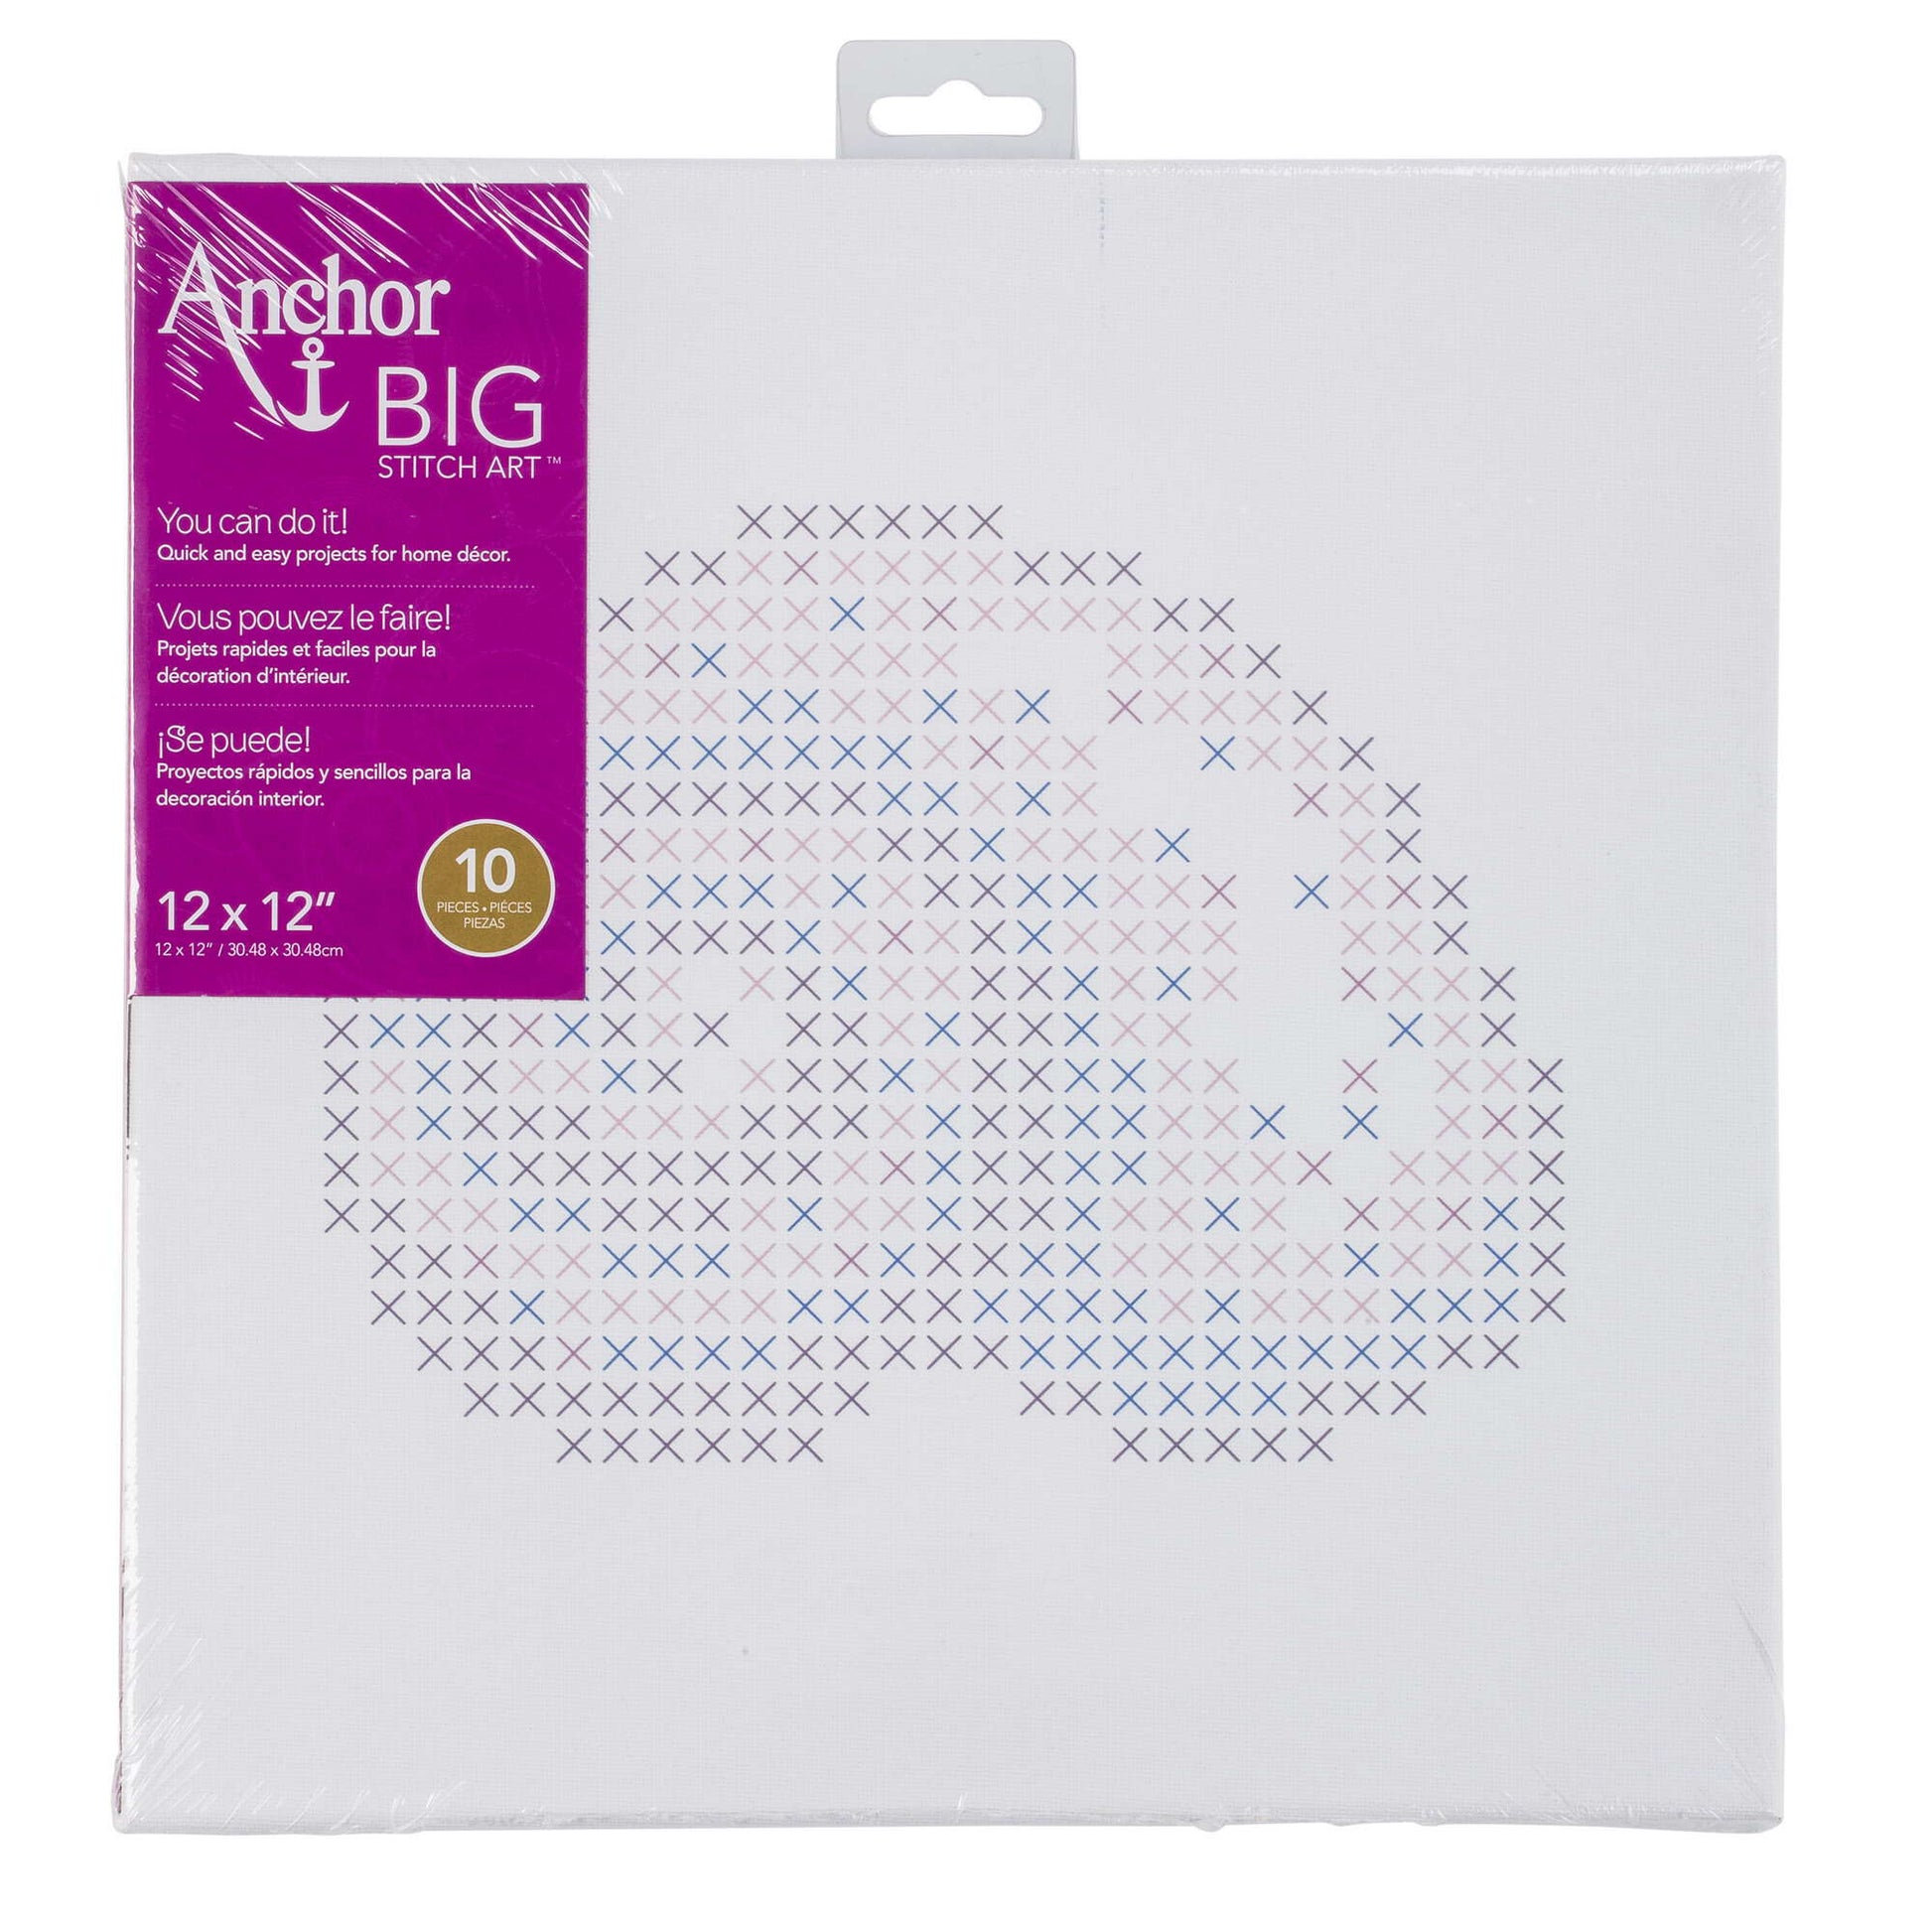 Anchor Big Stitch Art 12" x 12" - Clearance Items Conical